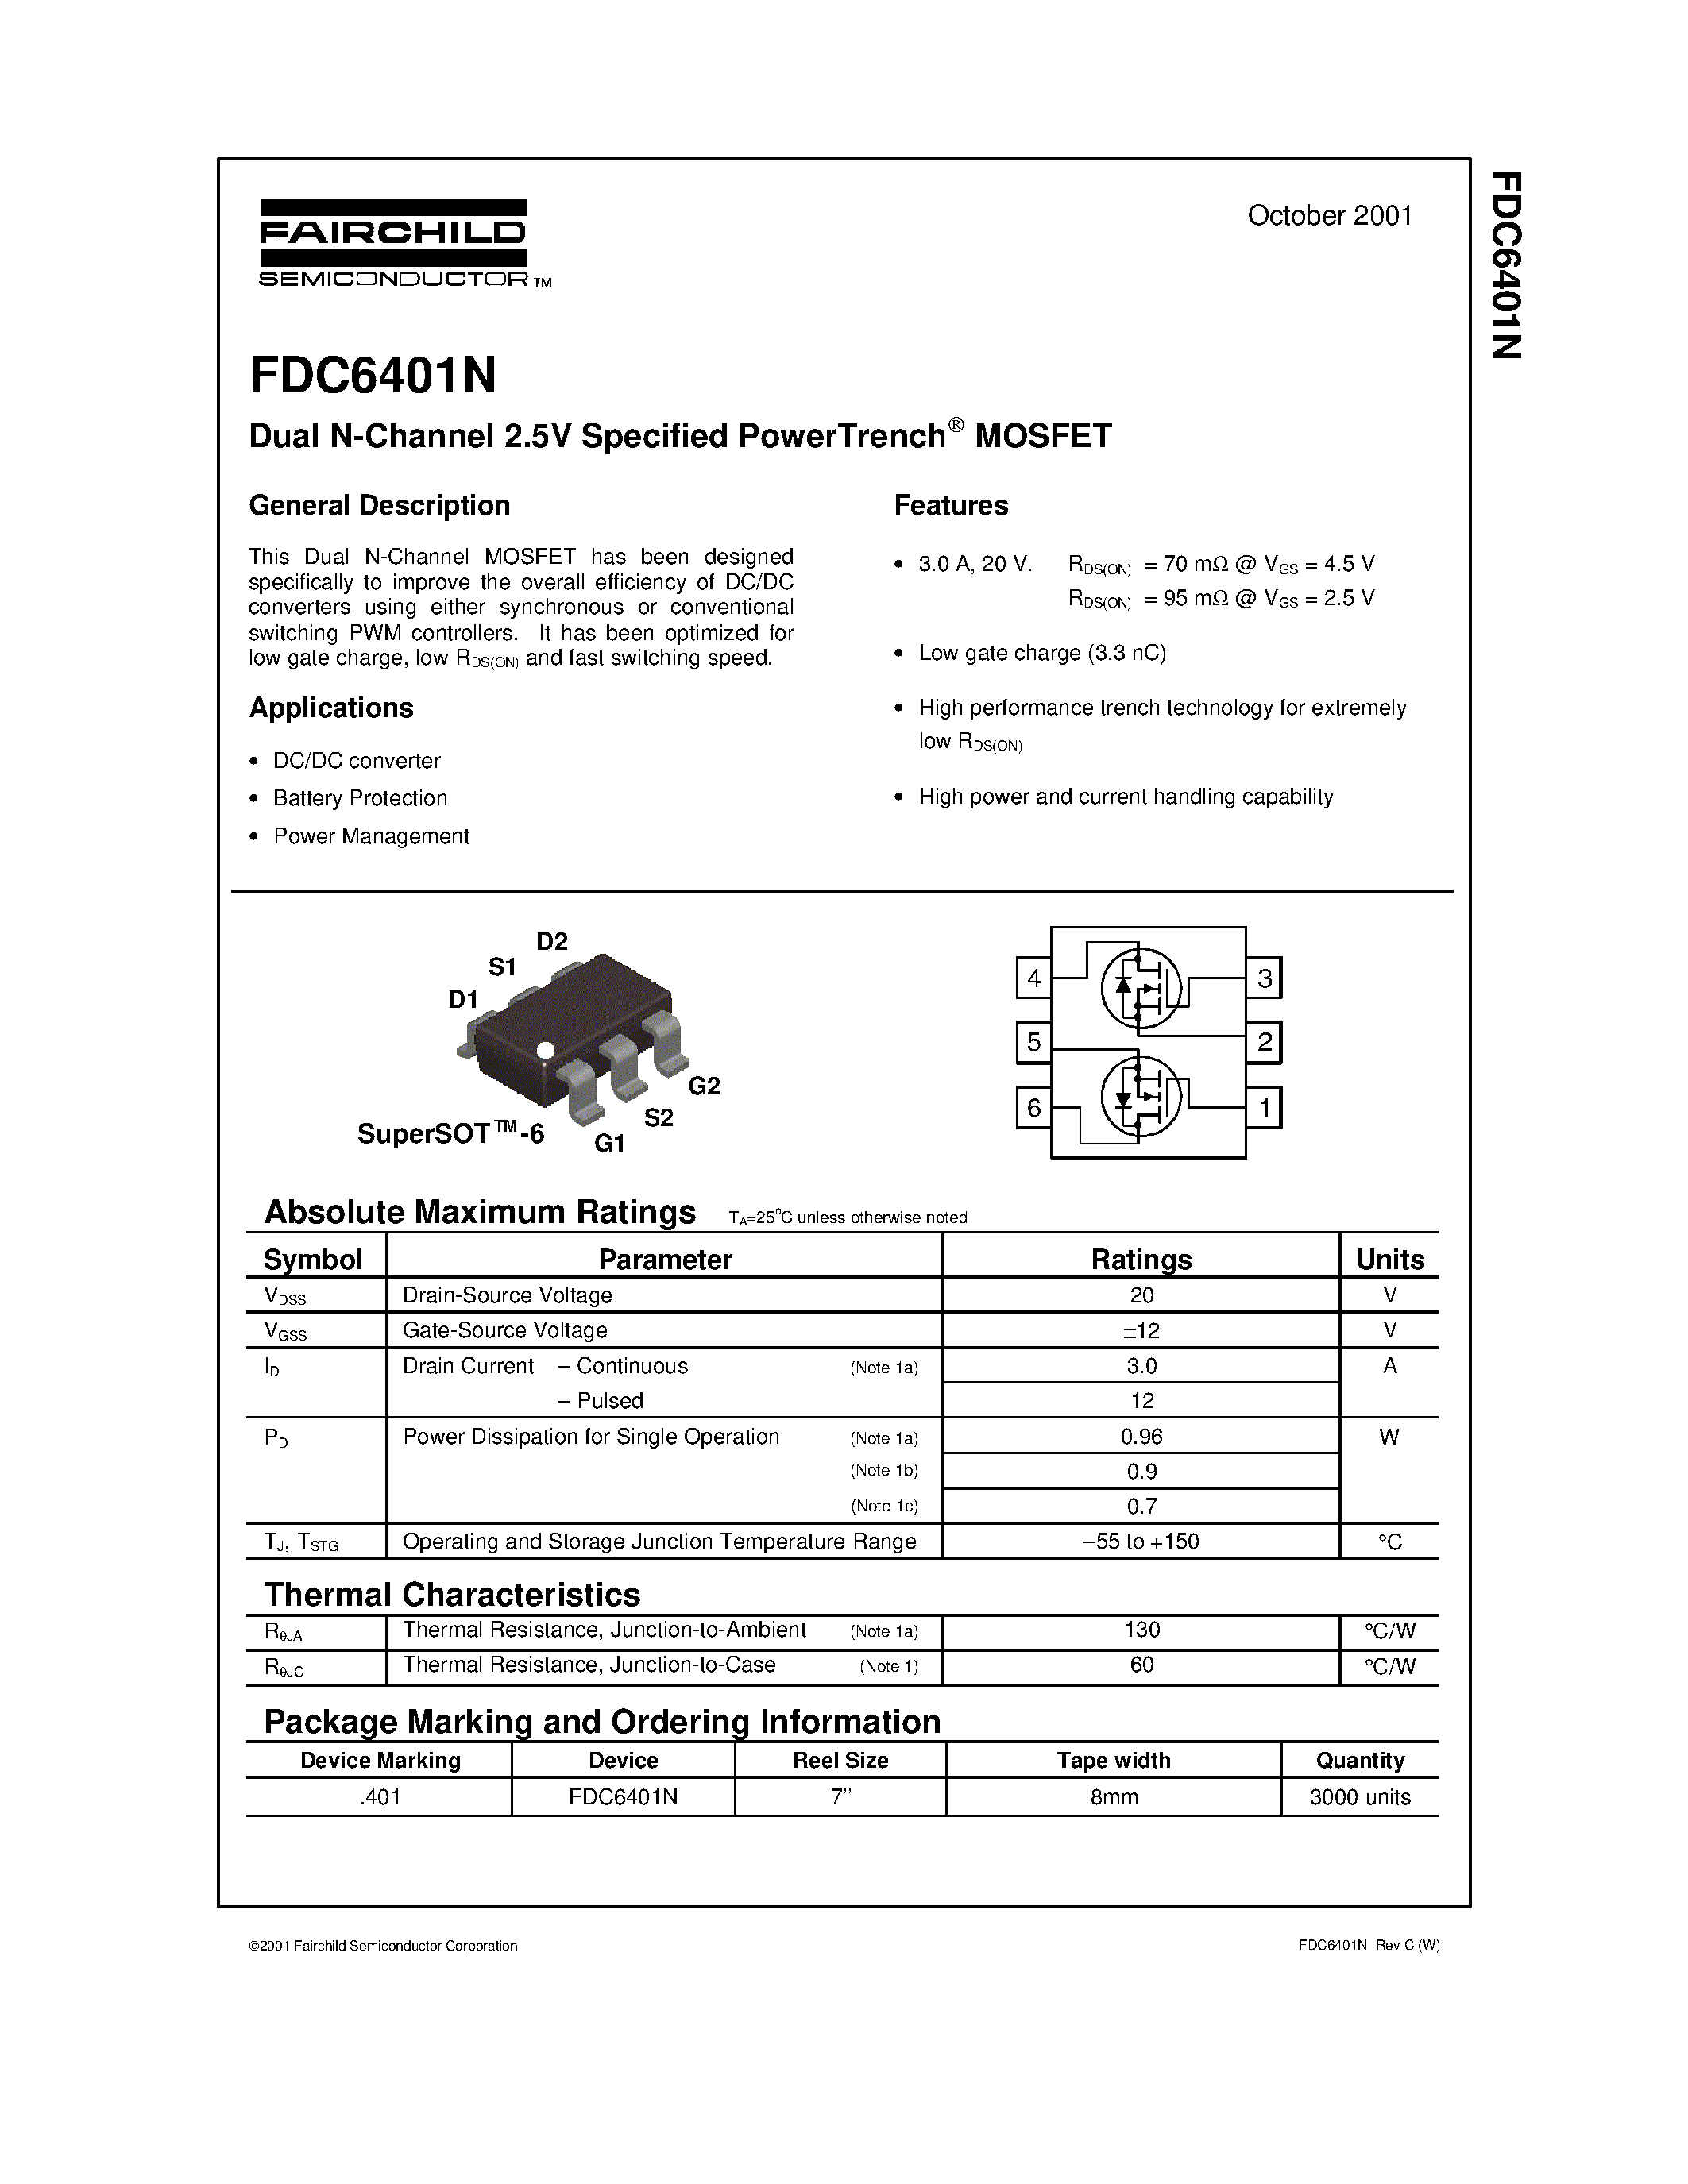 Datasheet FDC6401N - Dual N-Channel 2.5V Specified PowerTrench MOSFET page 1